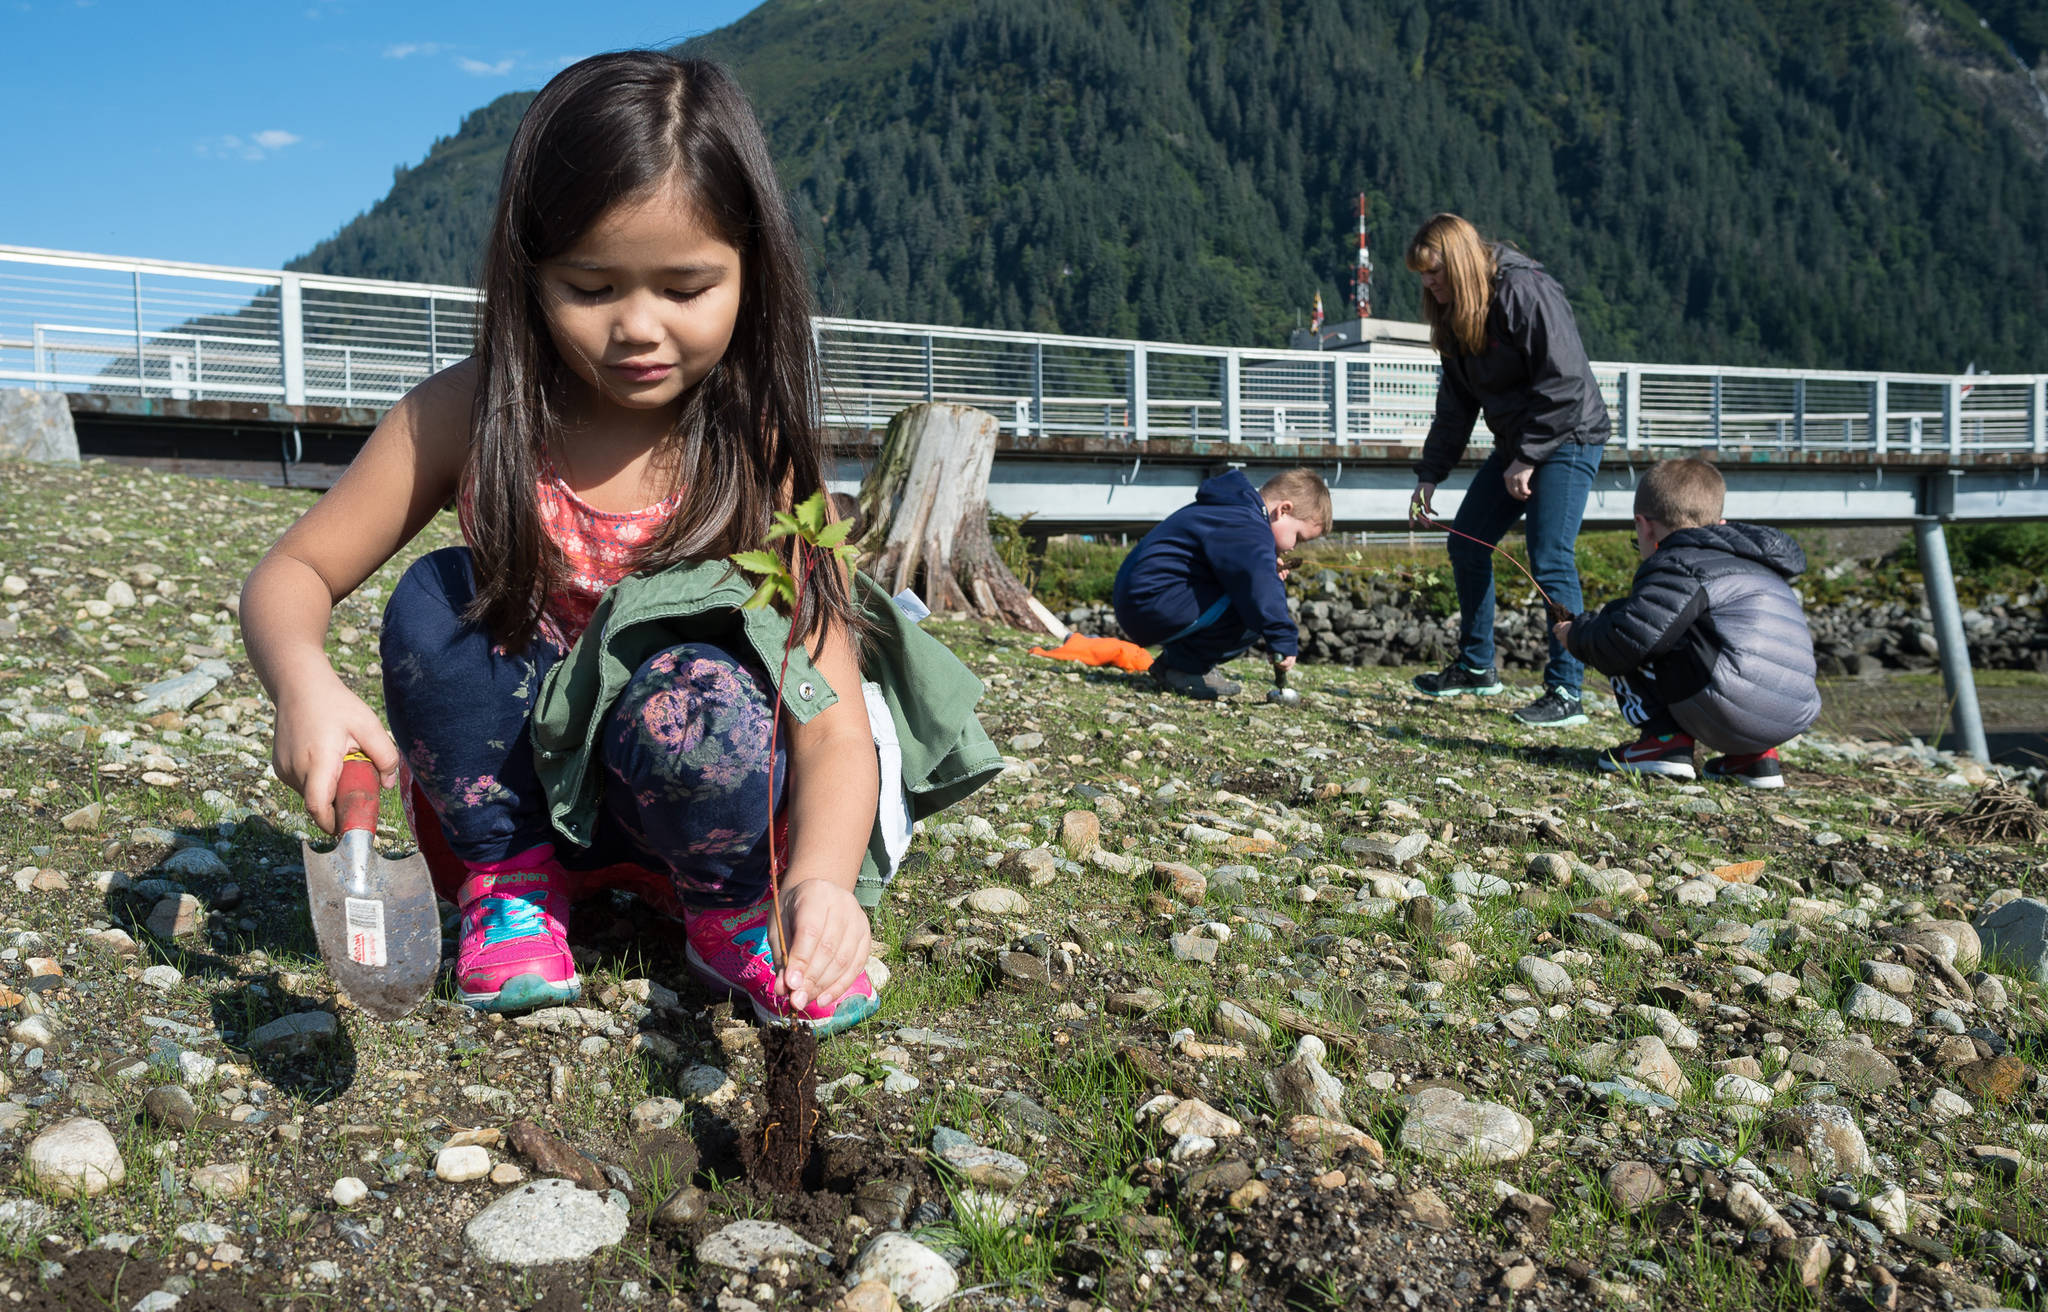 Harborview Elementary School first-grader Sofia Fernandez plants a willow with schoolmates on a newly created island next to the Seawalk on Tuesday, Sept. 5, 2017. Harborview students will get a chance to plant 300 native species on the island over the next week to transform the area into habitat for birds. (Michael Penn | Juneau Empire)